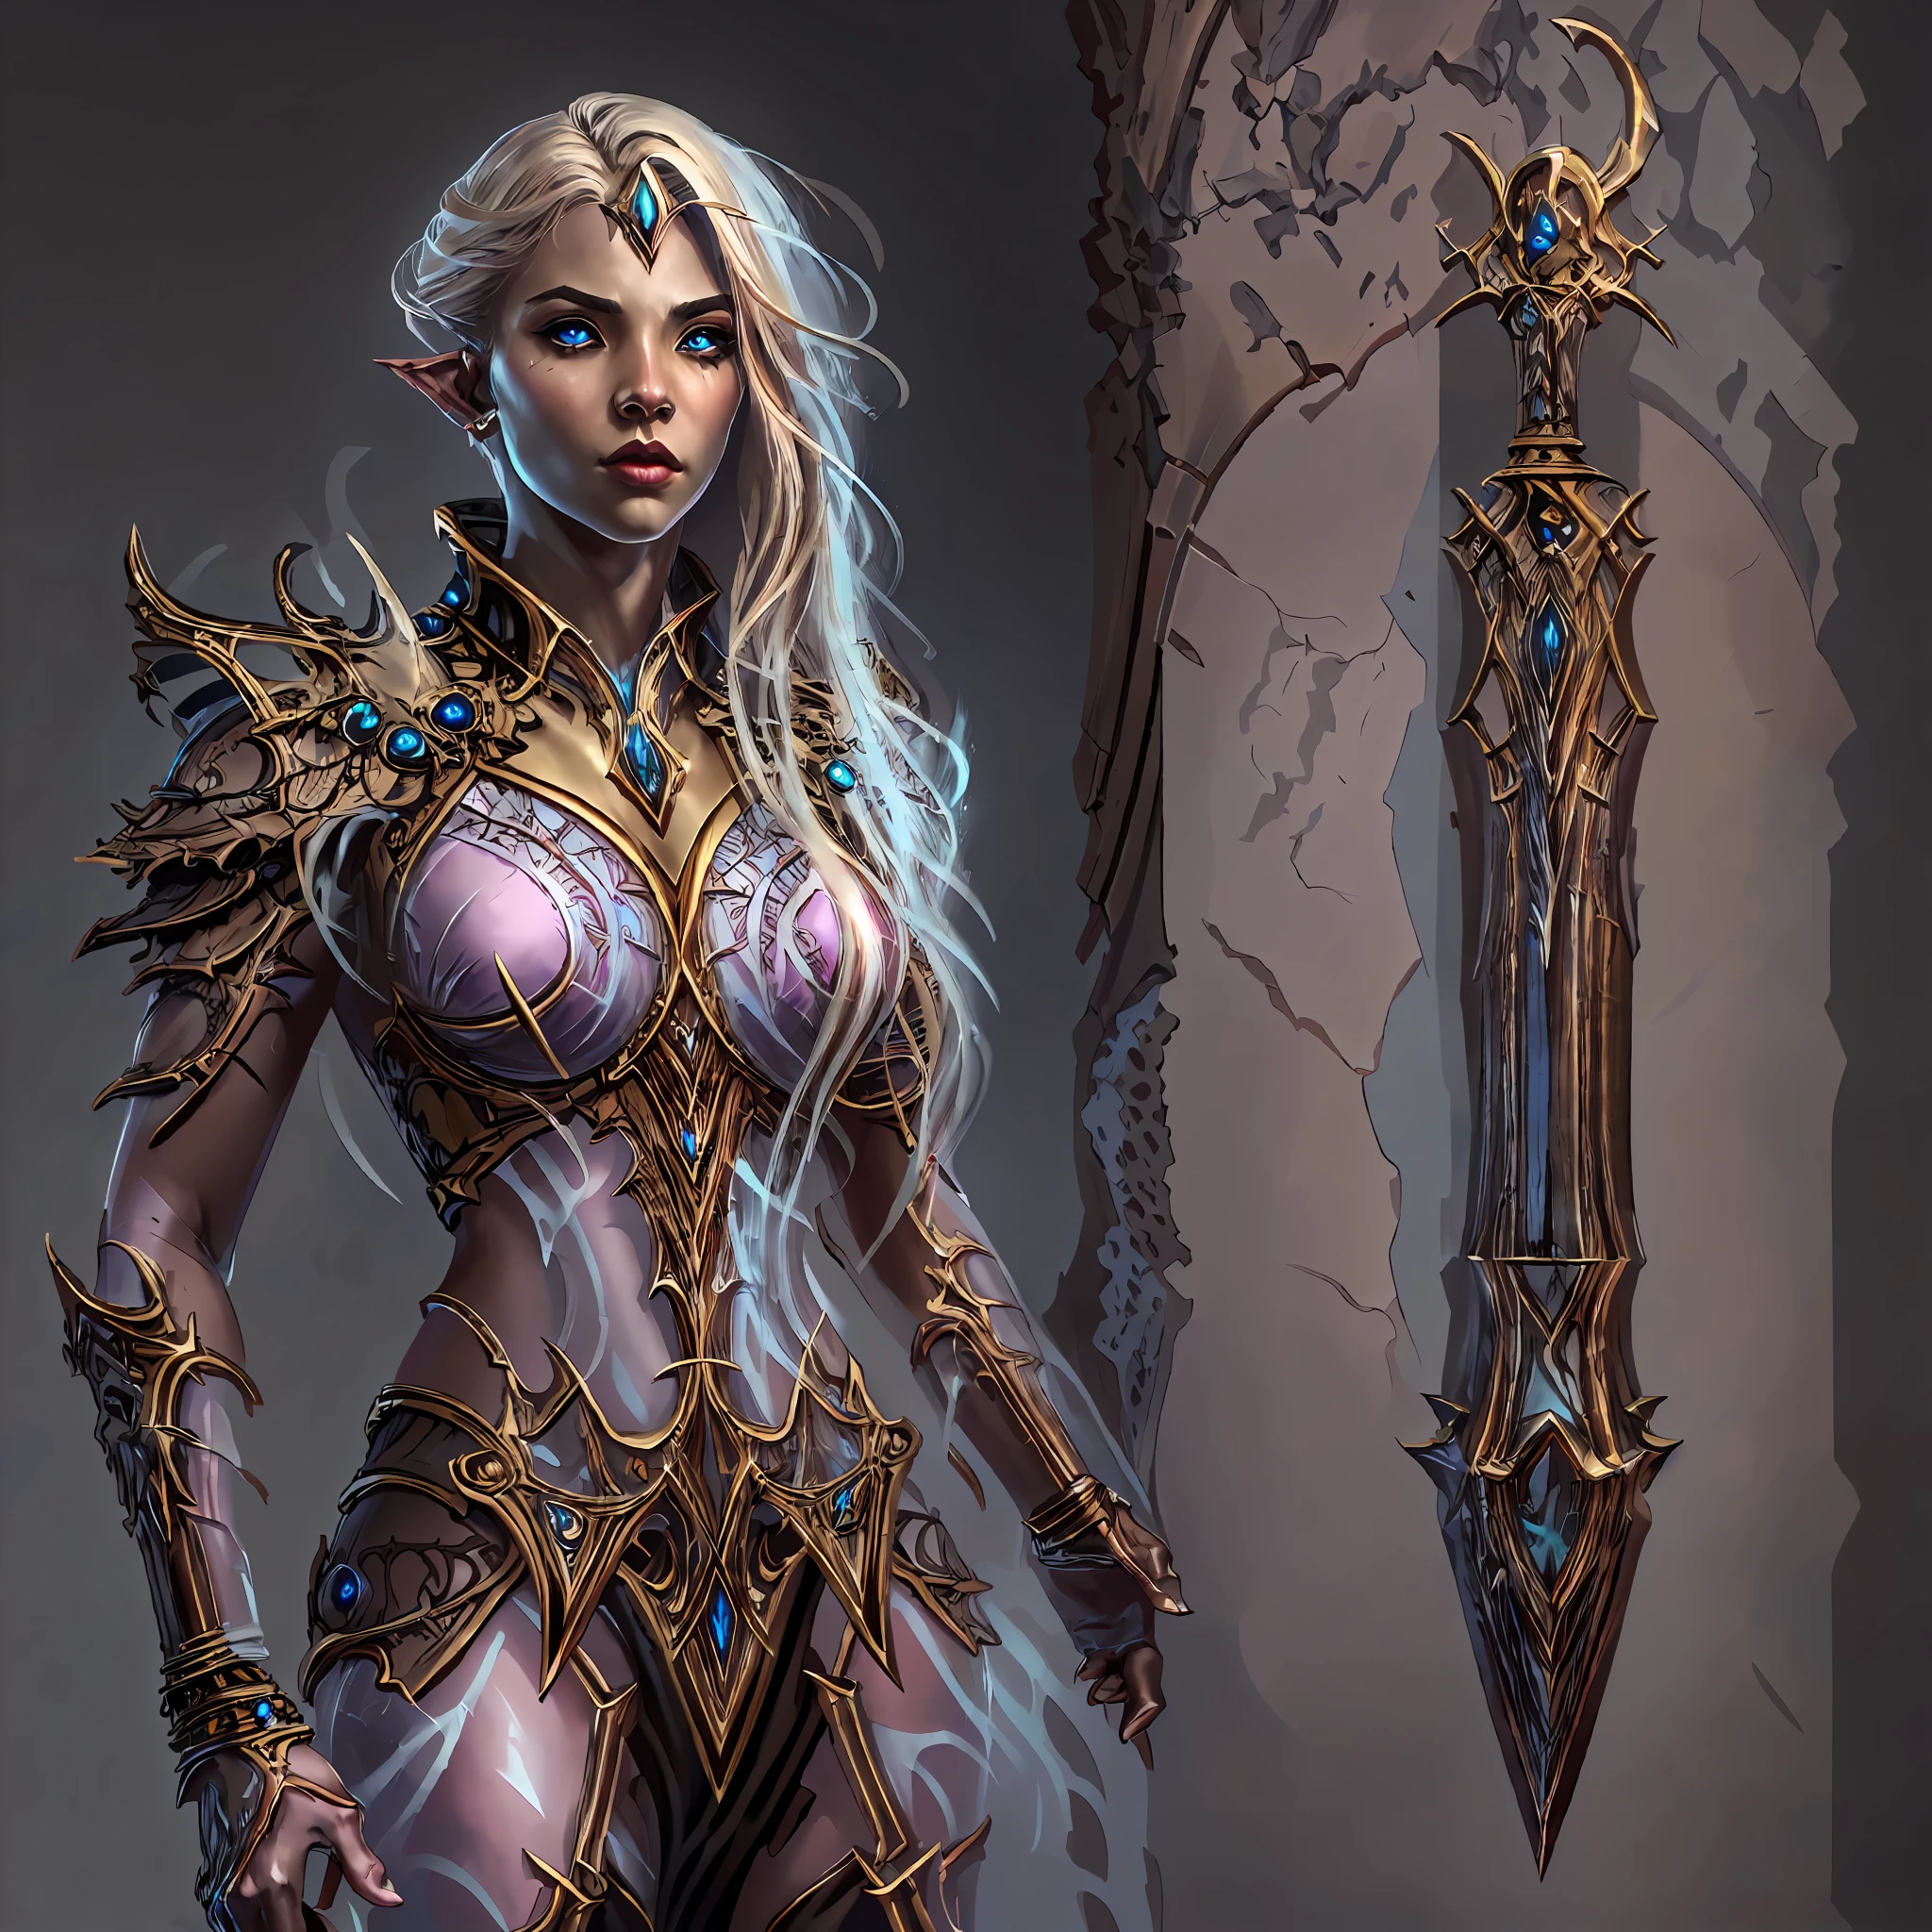 high details, best quality, 8k, [ultra detailed], masterpiece, best quality, (extremely detailed), dynamic angle, ultra wide shot, RAW, photorealistic, fantasy art, dnd art, rpg art, realistic art, a wide angle picture of an epic female elf, arcane warrior, warrior of magic, fighter of the arcana, full body, [[anatomically correct]] full body (1.5 intricate details, Masterpiece, best quality) casting a spell (1.5 intricate details, Masterpiece, best quality), casting an epic spell, [colorful magical sigils in the air],[ colorful arcane markings floating] (1.6 intricate details, Masterpiece, best quality) holding an [epic magical sword] (1.5 intricate details, Masterpiece, best quality) holding epic [magical sword glowing in red light] (1.5 intricate details, Masterpiece, best quality). in fantasy urban street (1.5 intricate details, Masterpiece, best quality), a female beautiful epic elf wearing elven leather armor (1.4 intricate details, Masterpiece, best quality), high heeled leather boots, ultra detailed face, small pointed ears,  thick hair, long hair, dynamic hair, fair skin intense eyes, fantasy city background (intense details), sun light, backlight, depth of field (1.4 intricate details, Masterpiece, best quality), dynamic angle, (1.4 intricate details, Masterpiece, best quality) 3D rendering, high details, best quality, highres, ultra wide angle